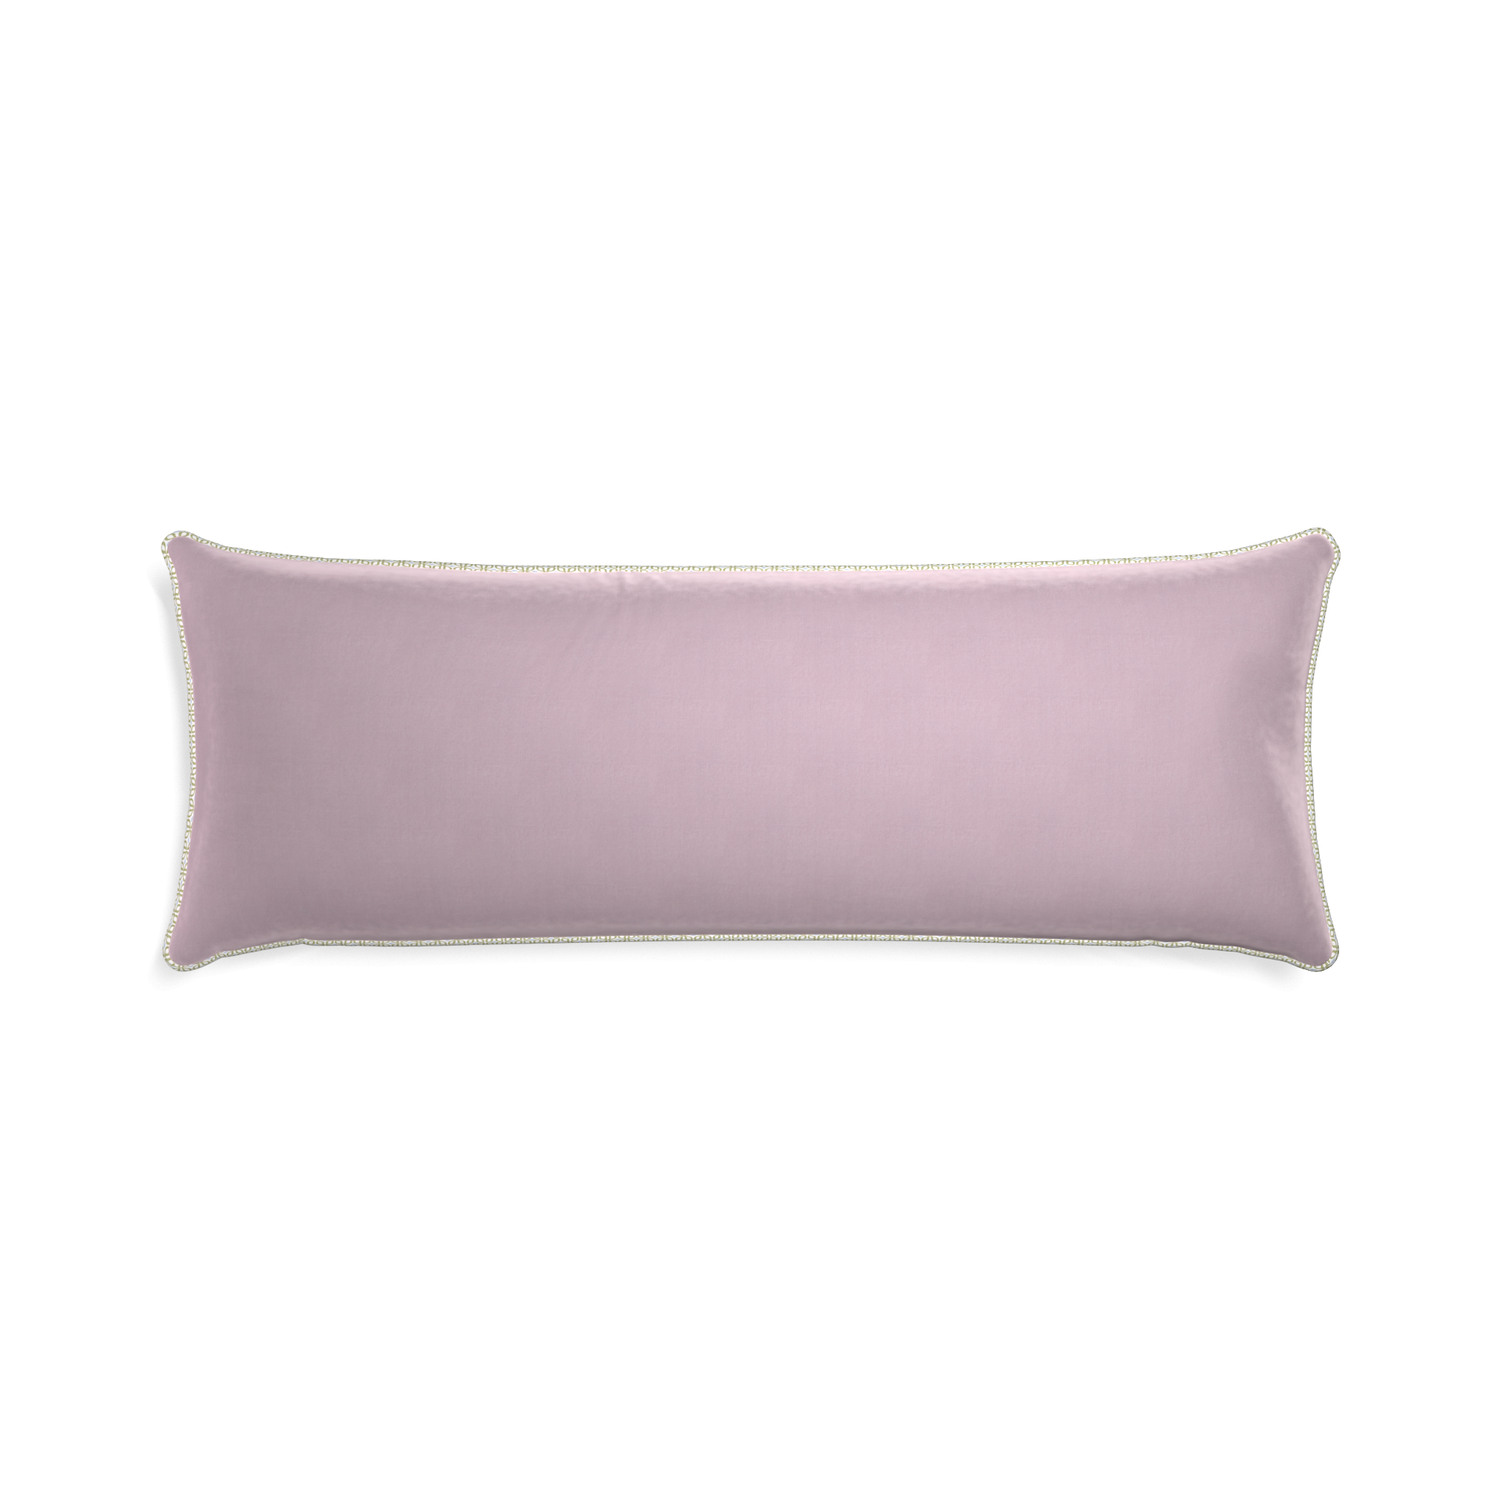 Xl-lumbar lilac velvet custom lilacpillow with l piping on white background